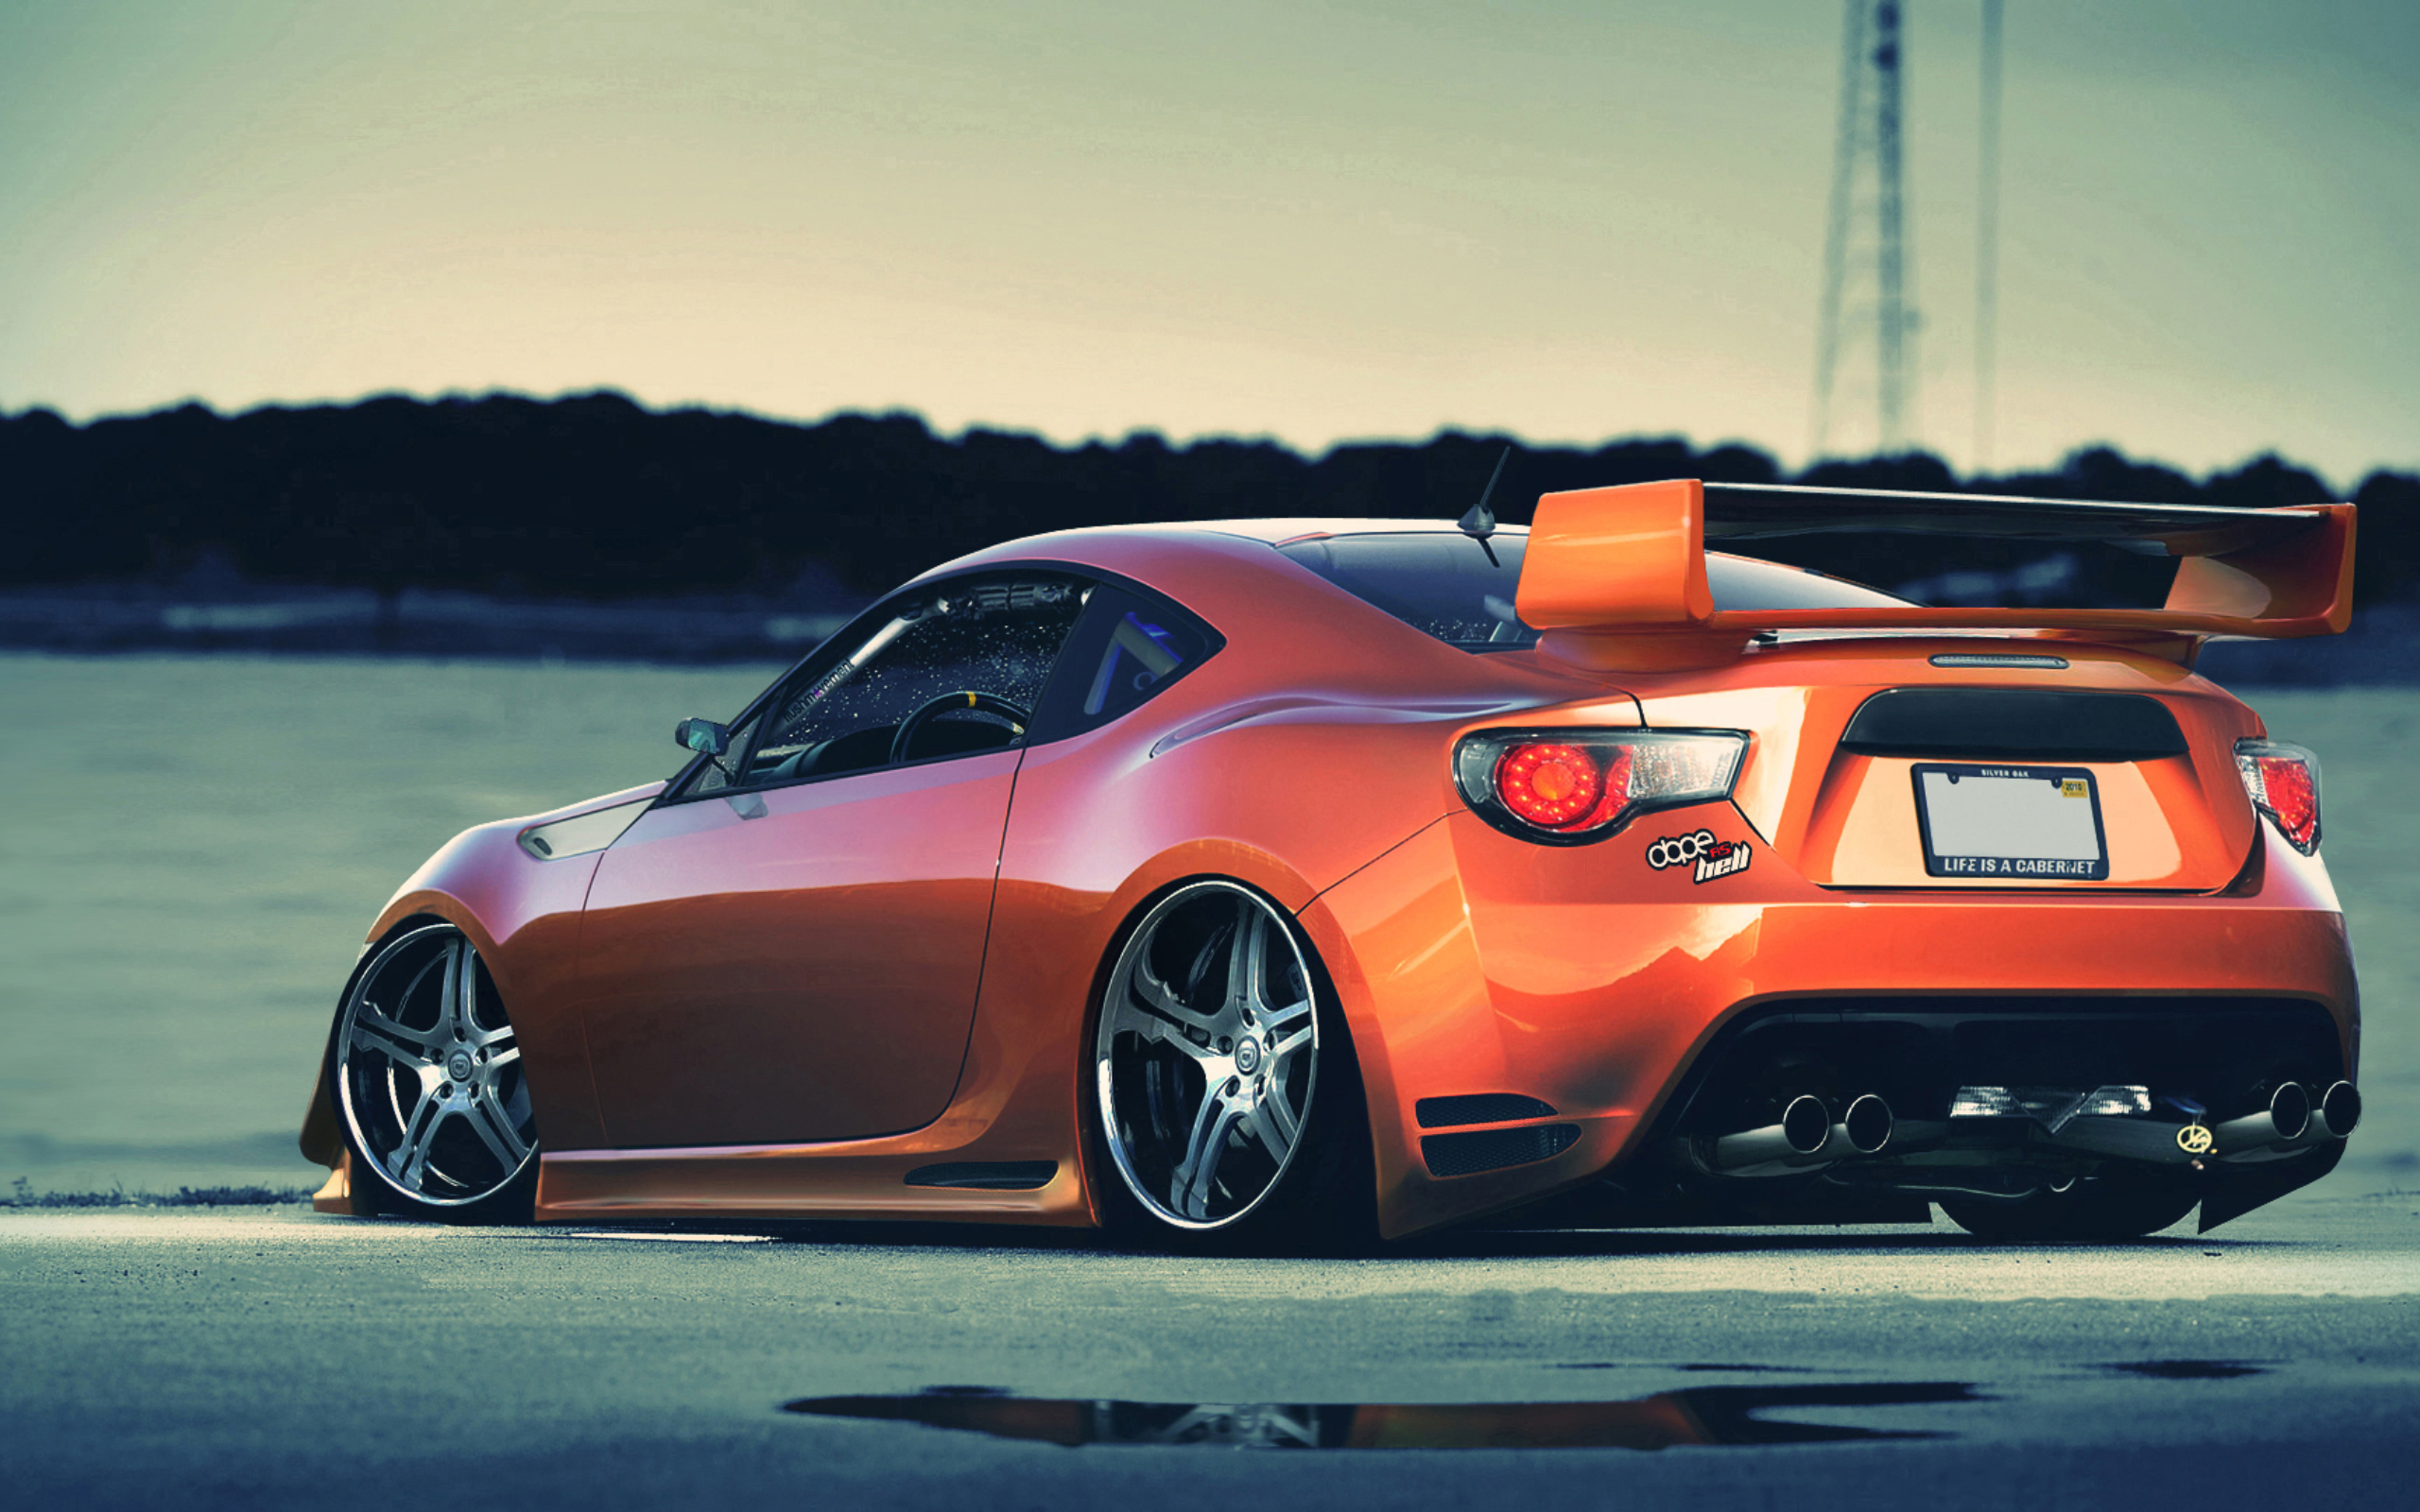 Download wallpaper Toyota GT back view, tuning, orange GT stance, supercars, japanese cars, Toyota for desktop with resolution 2560x1600. High Quality HD picture wallpaper